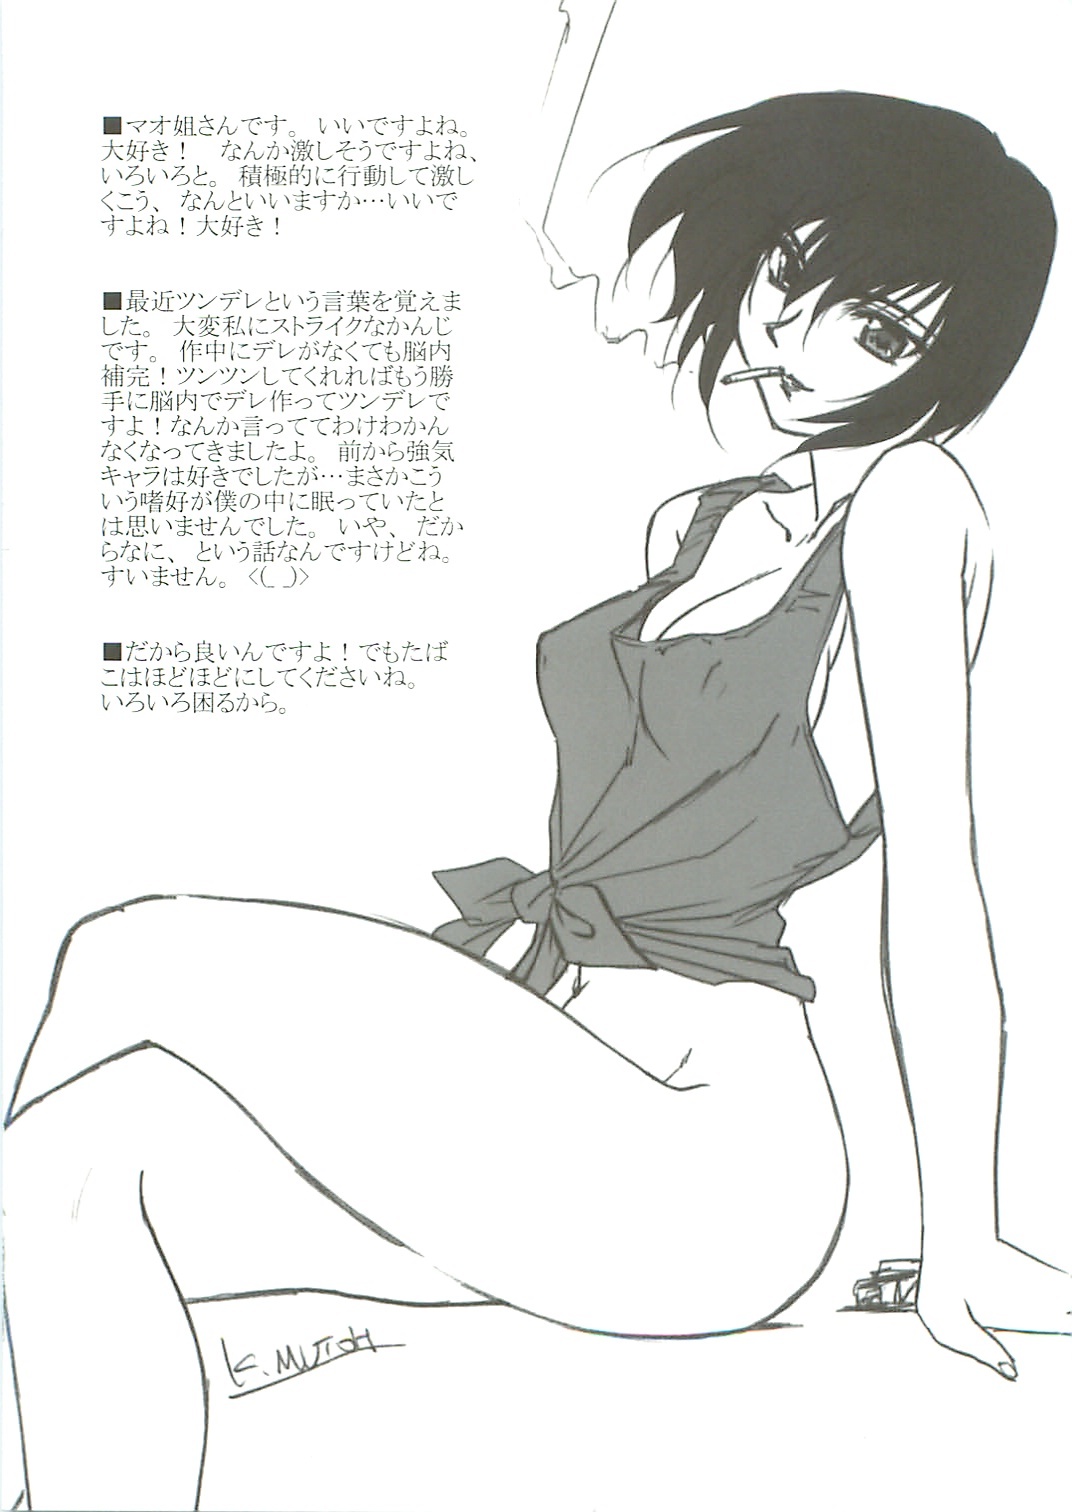 (C68) [STUDIO TRIUMPH (Mutou Keiji)] AstralBout Ver 9.5 (Mobile Suit Gundam SEED) page 4 full